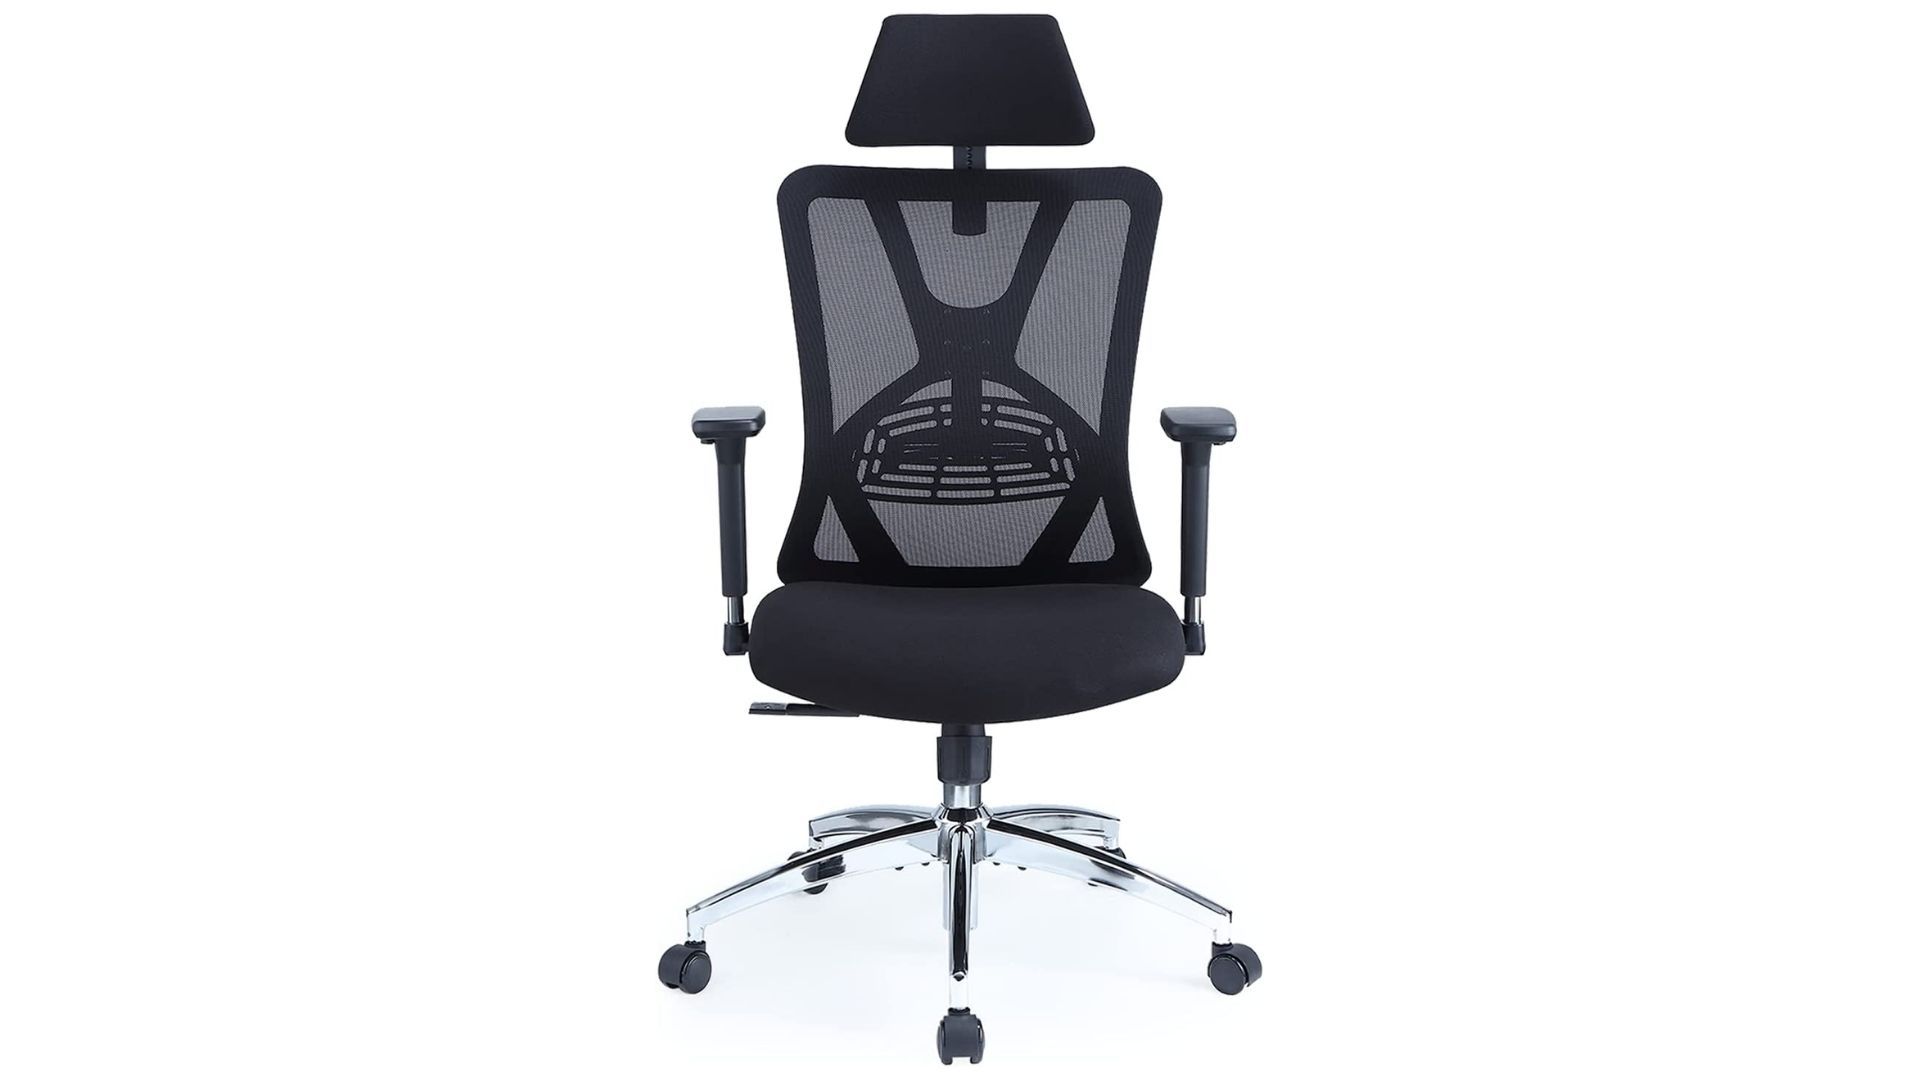 The Ticova Ergonomic Office Chair features a high mesh back with adjustable lumbar support and a headrest